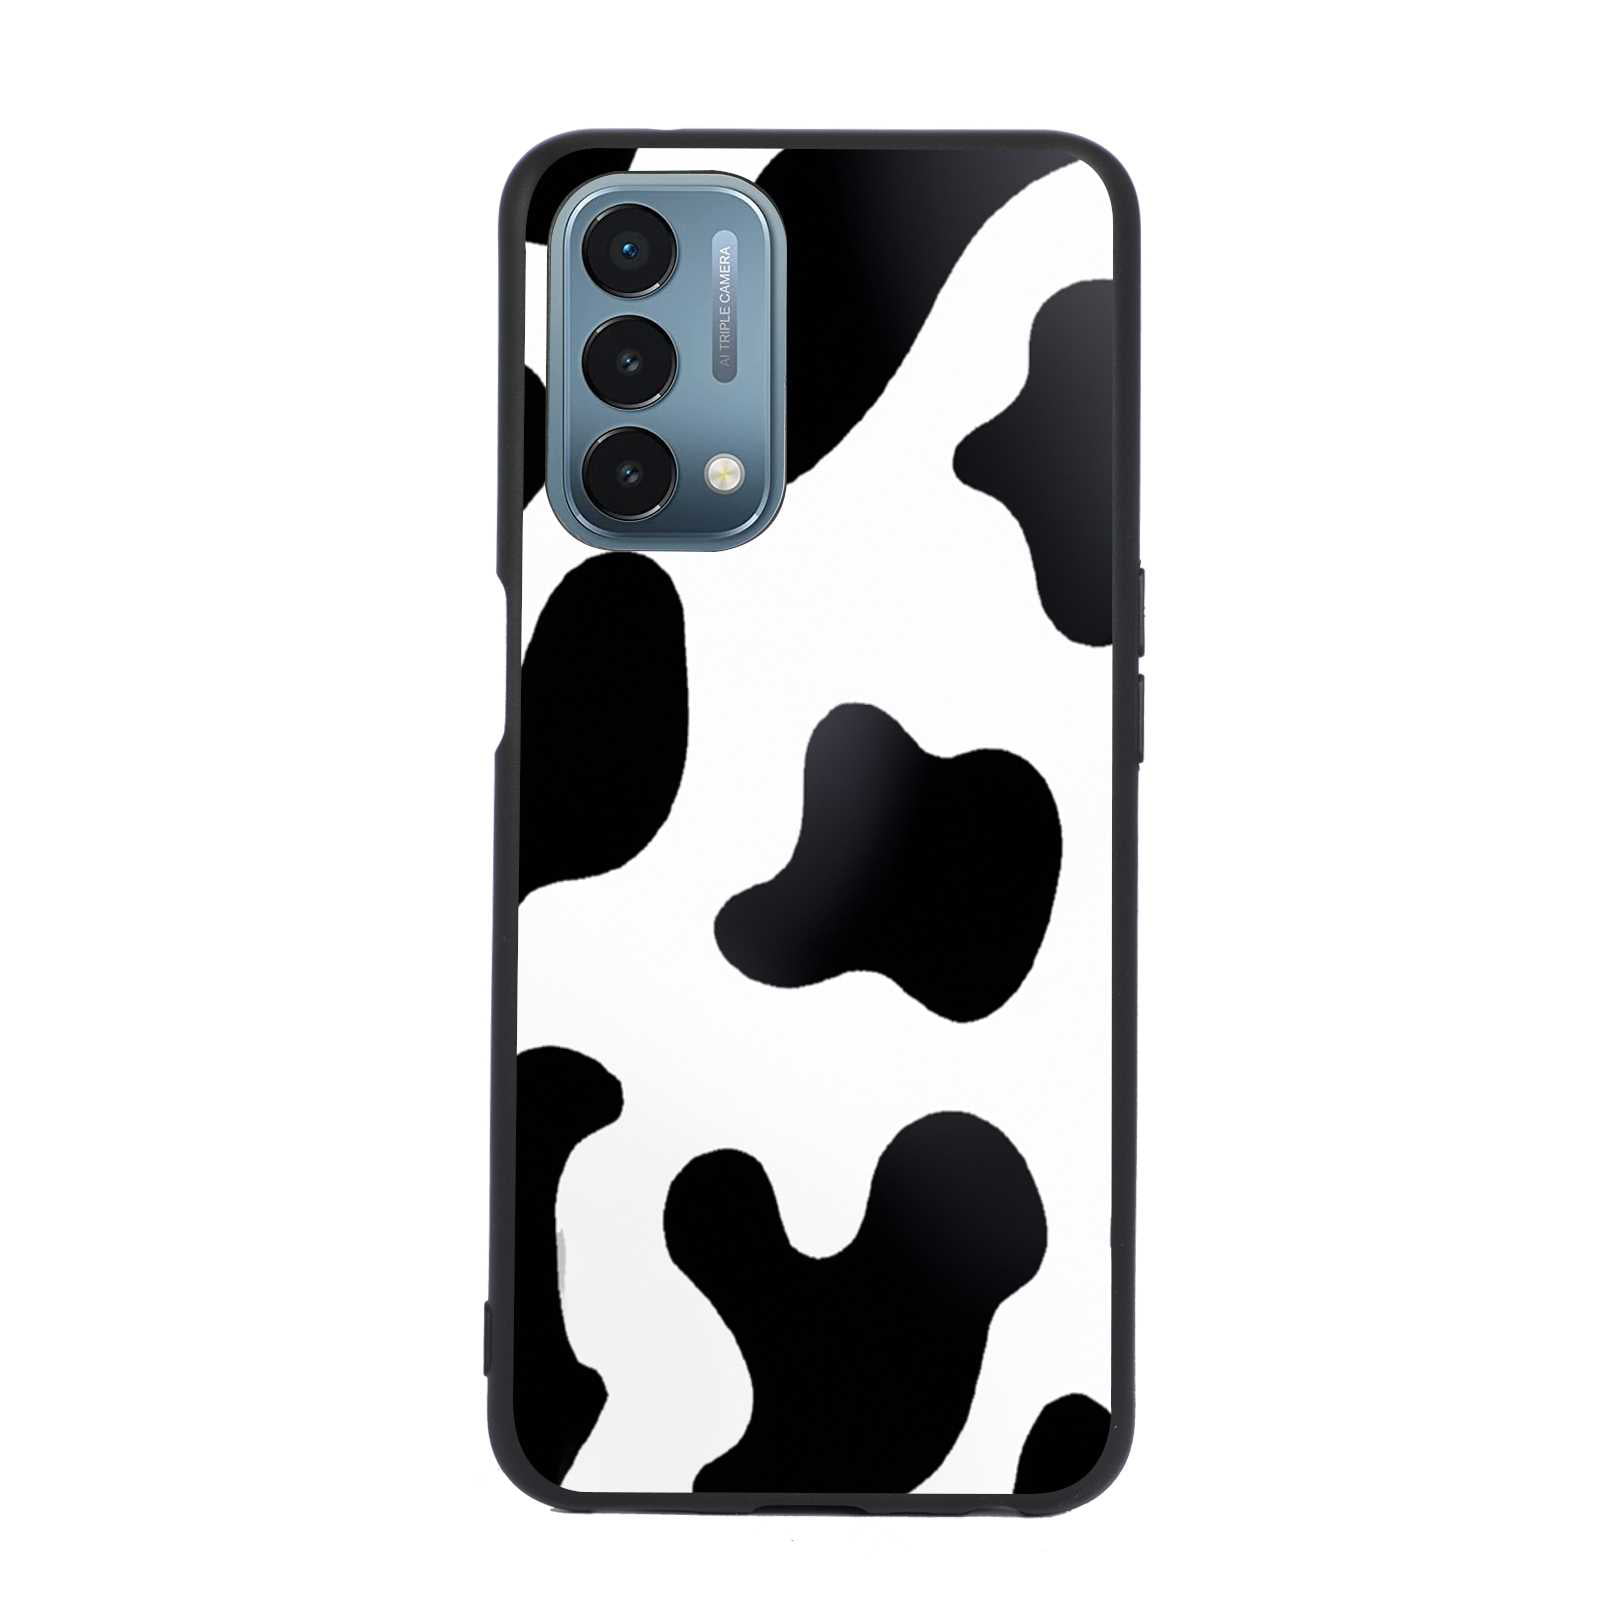 Wreck tjener Woods Cow Print phone case for OnePlus Nord N200 for Women Men Gifts,Soft  silicone Style Shockproof - Cow Print Case for OnePlus Nord N200 -  Walmart.com